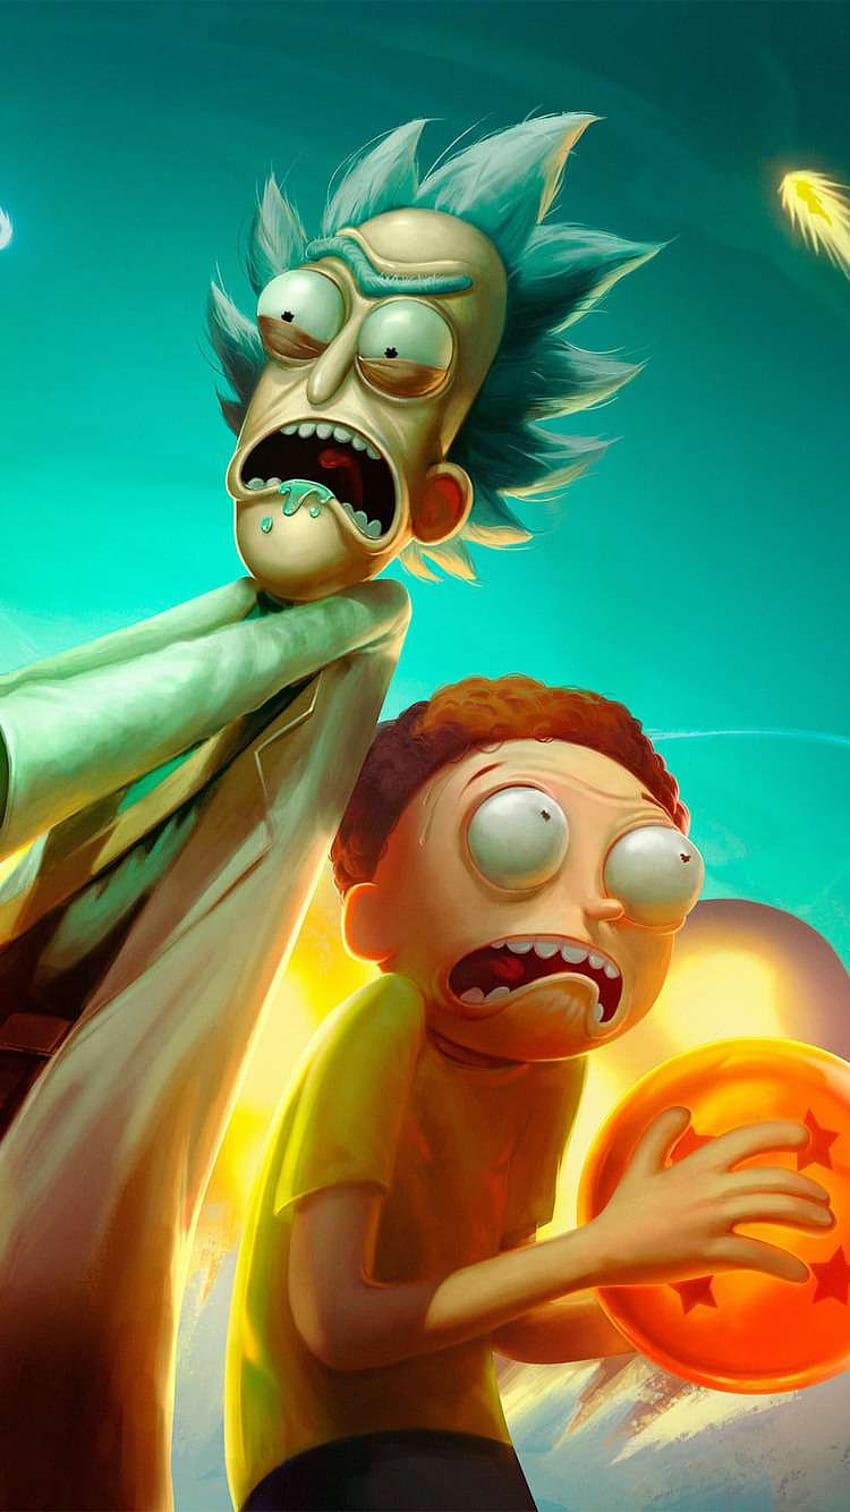 Supreme Rick And Morty Wallpapers  Top Free Supreme Rick And Morty  Backgrounds  WallpaperAccess